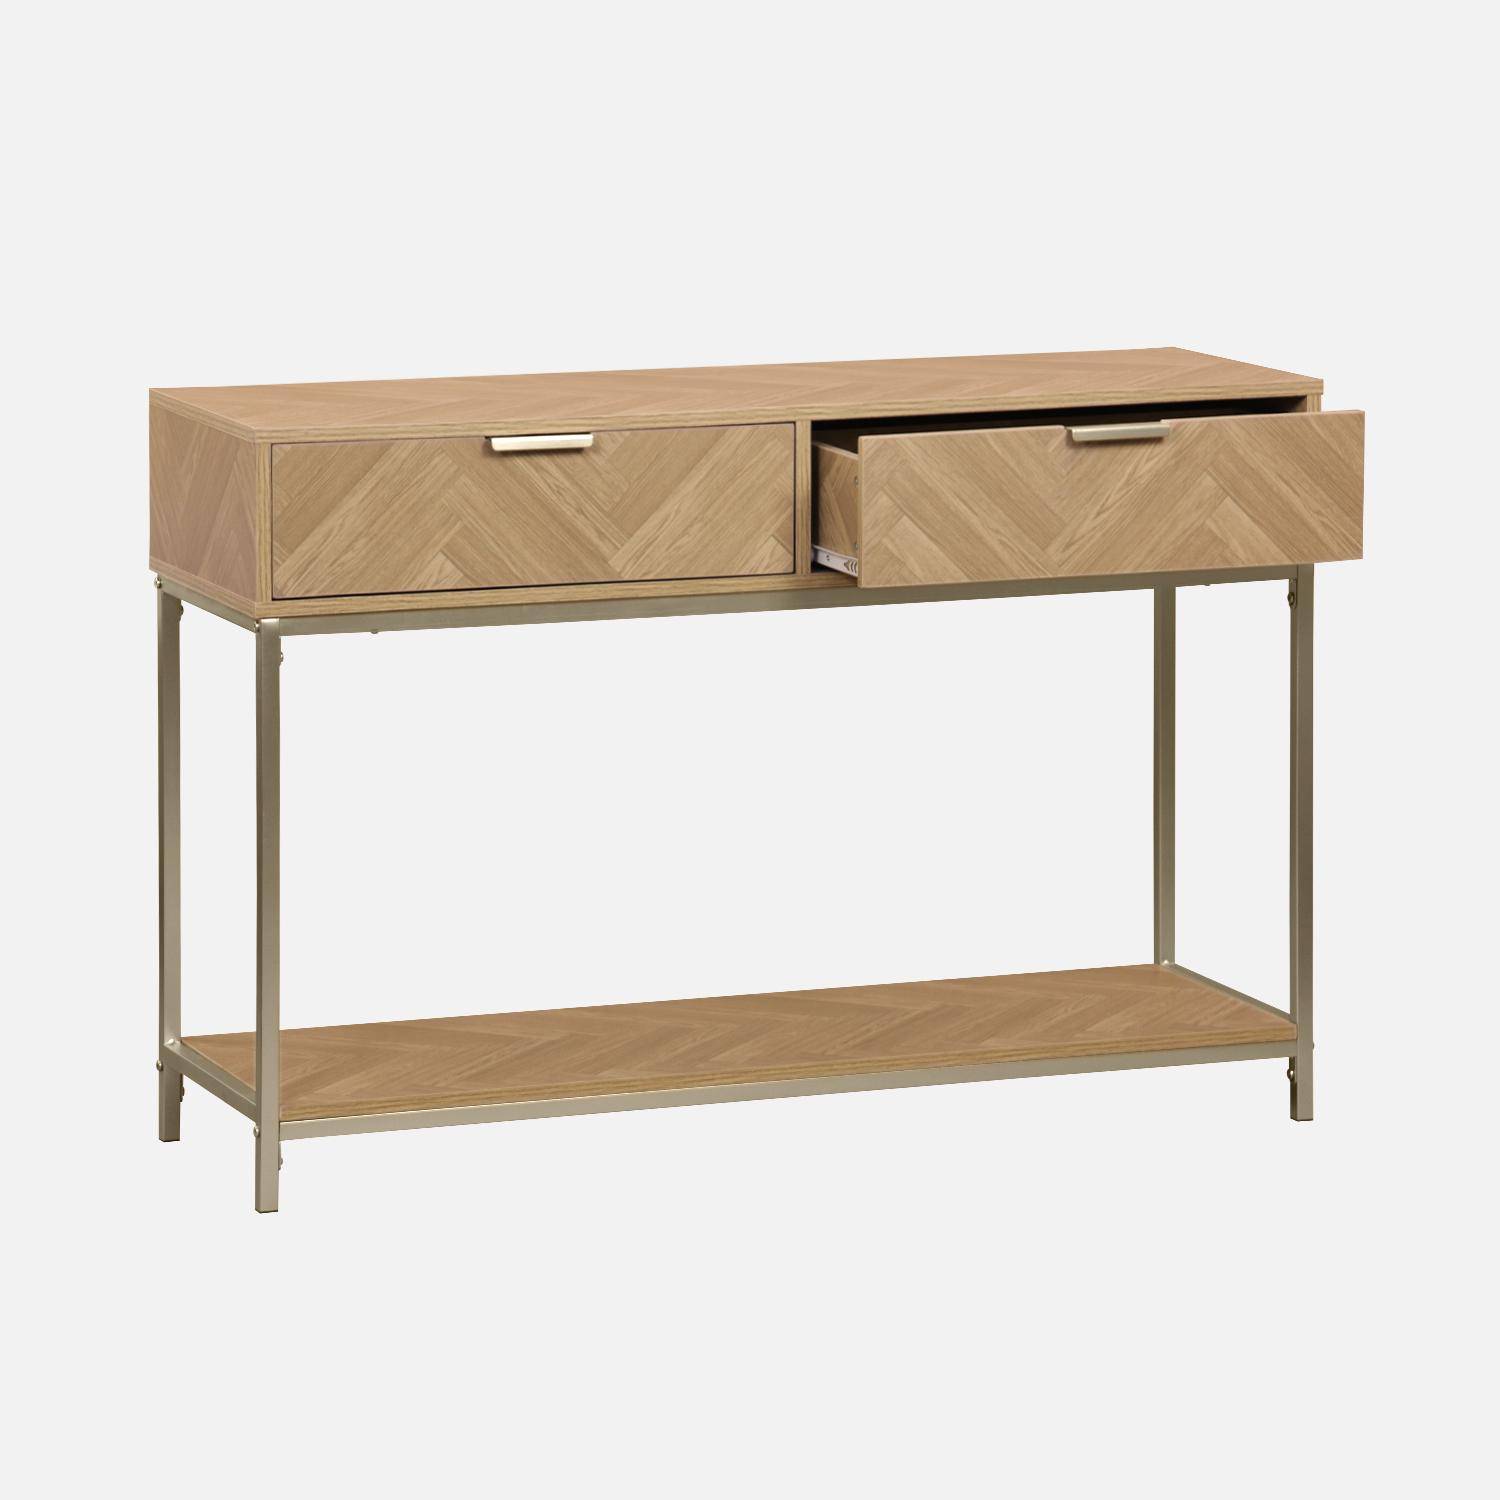 Herringbone hallway console table with 2 drawers, 110x35x75cm - Budapest - Natural Photo6